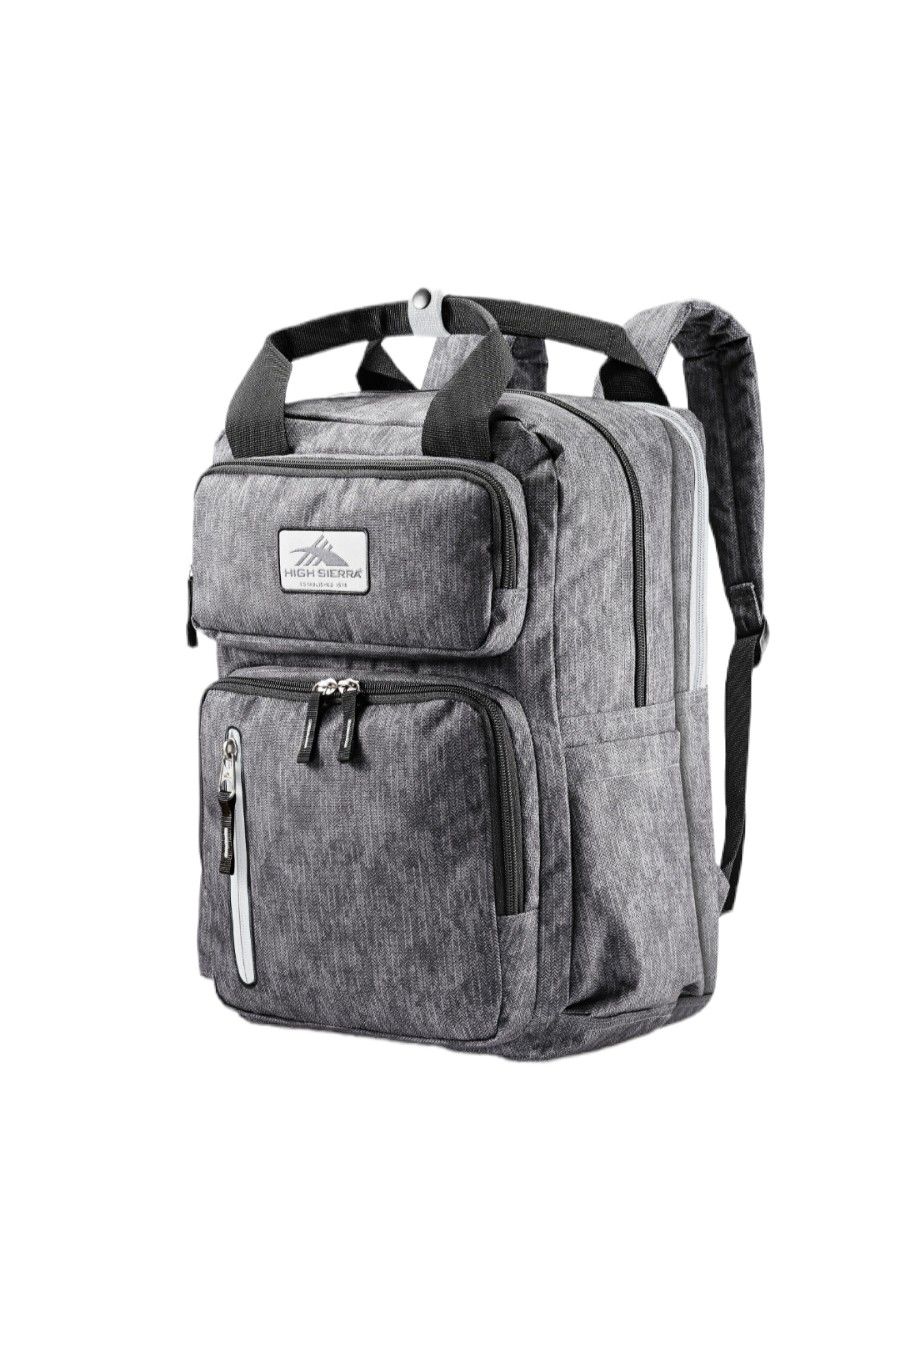 Brand NEW! High Sierra "Mindie Tech Backpack" Black/Grey Multipocket For School/Work/Outdoors/Traveling/Everyday Use/Gifts